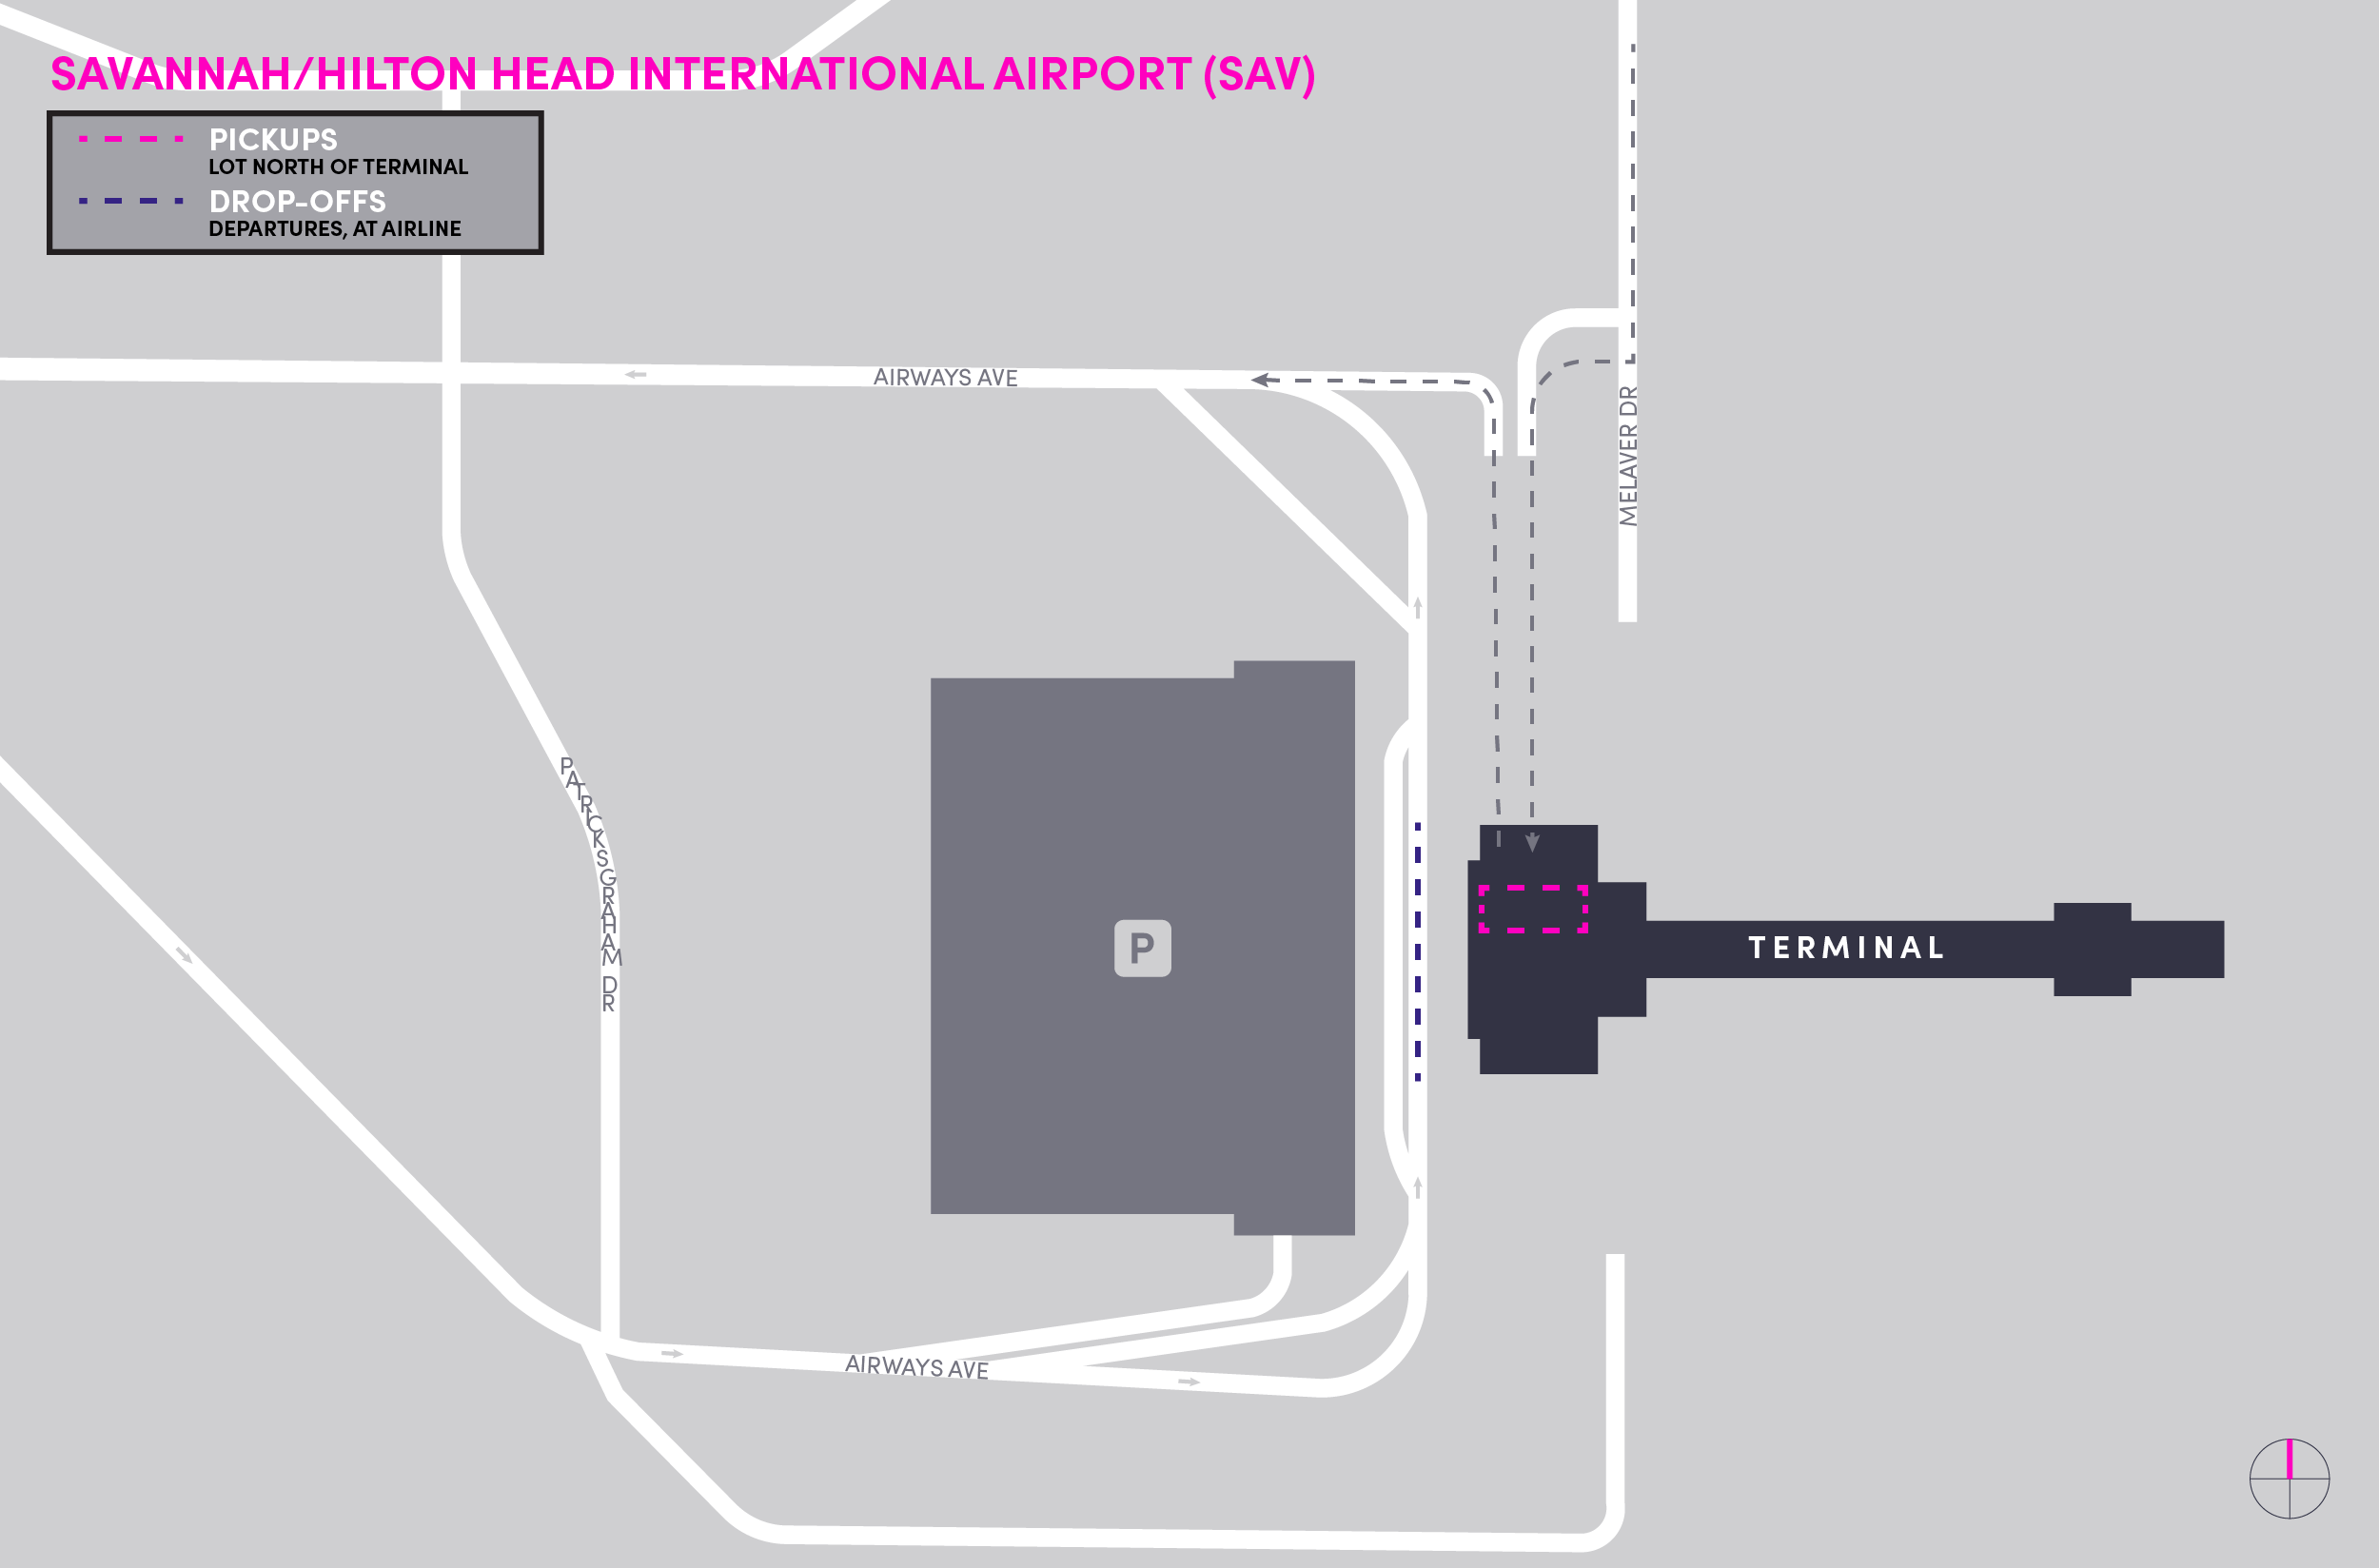 This image is a map of the SAV airport. It includes staging lot, pickup, and drop-off areas.